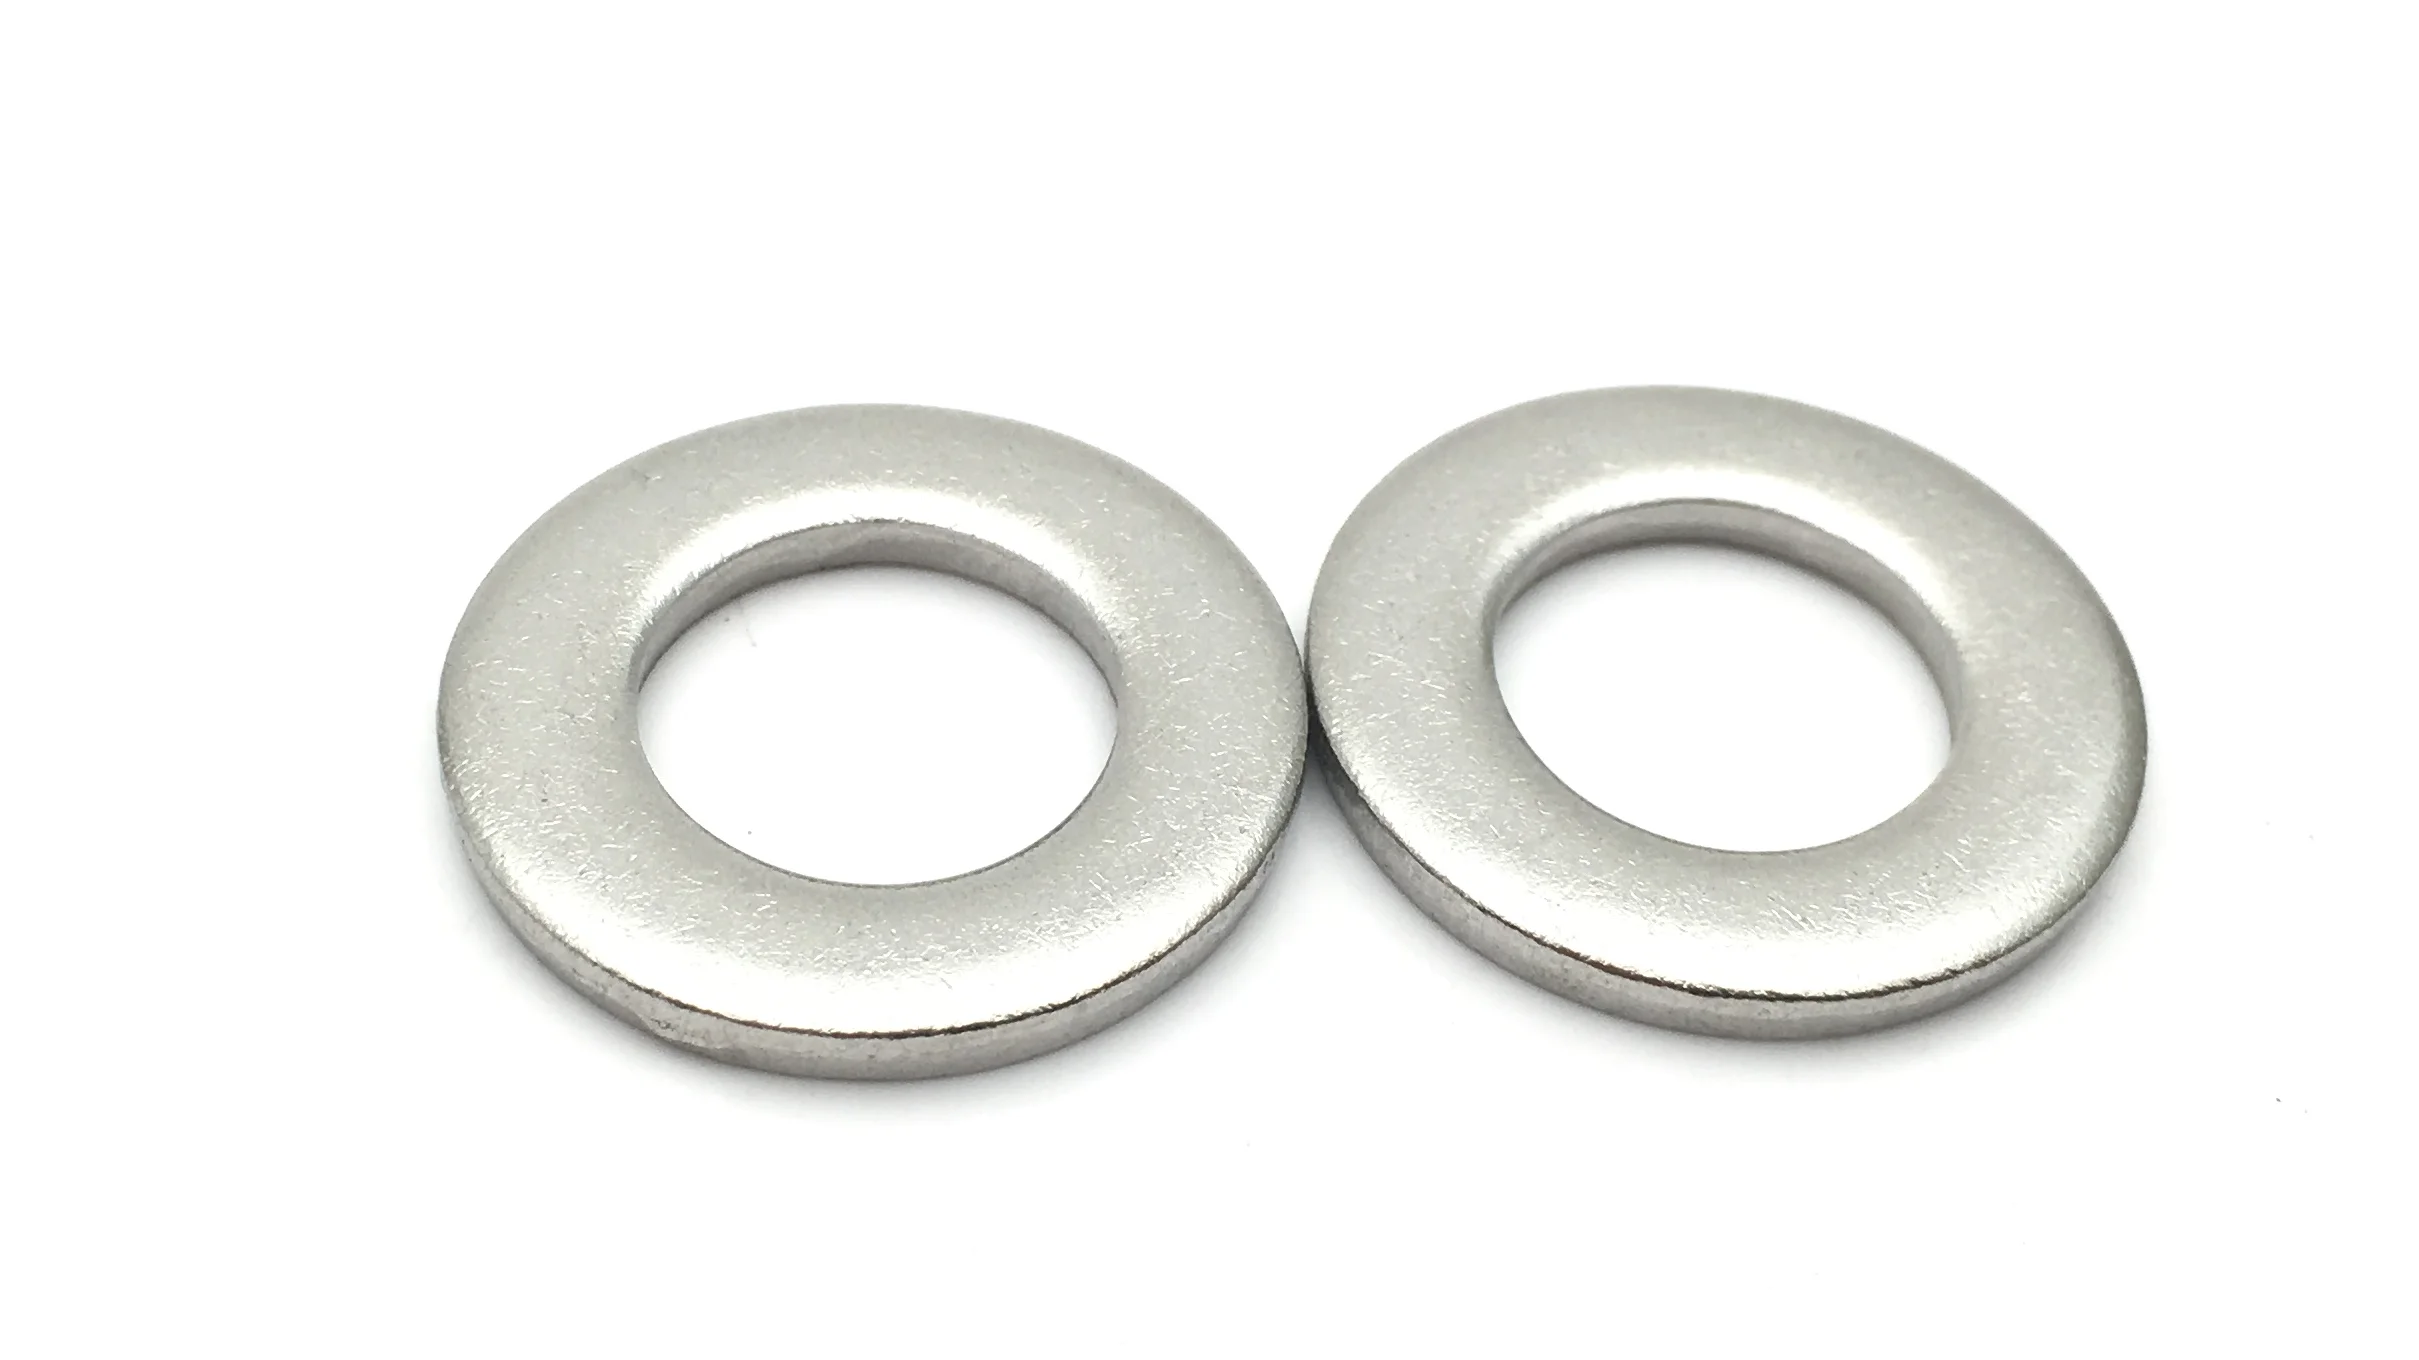 Mixed Thick 3/16" Pack of 30 Assorted 1/4" 5/16"   Steel FLAT WASHERS 